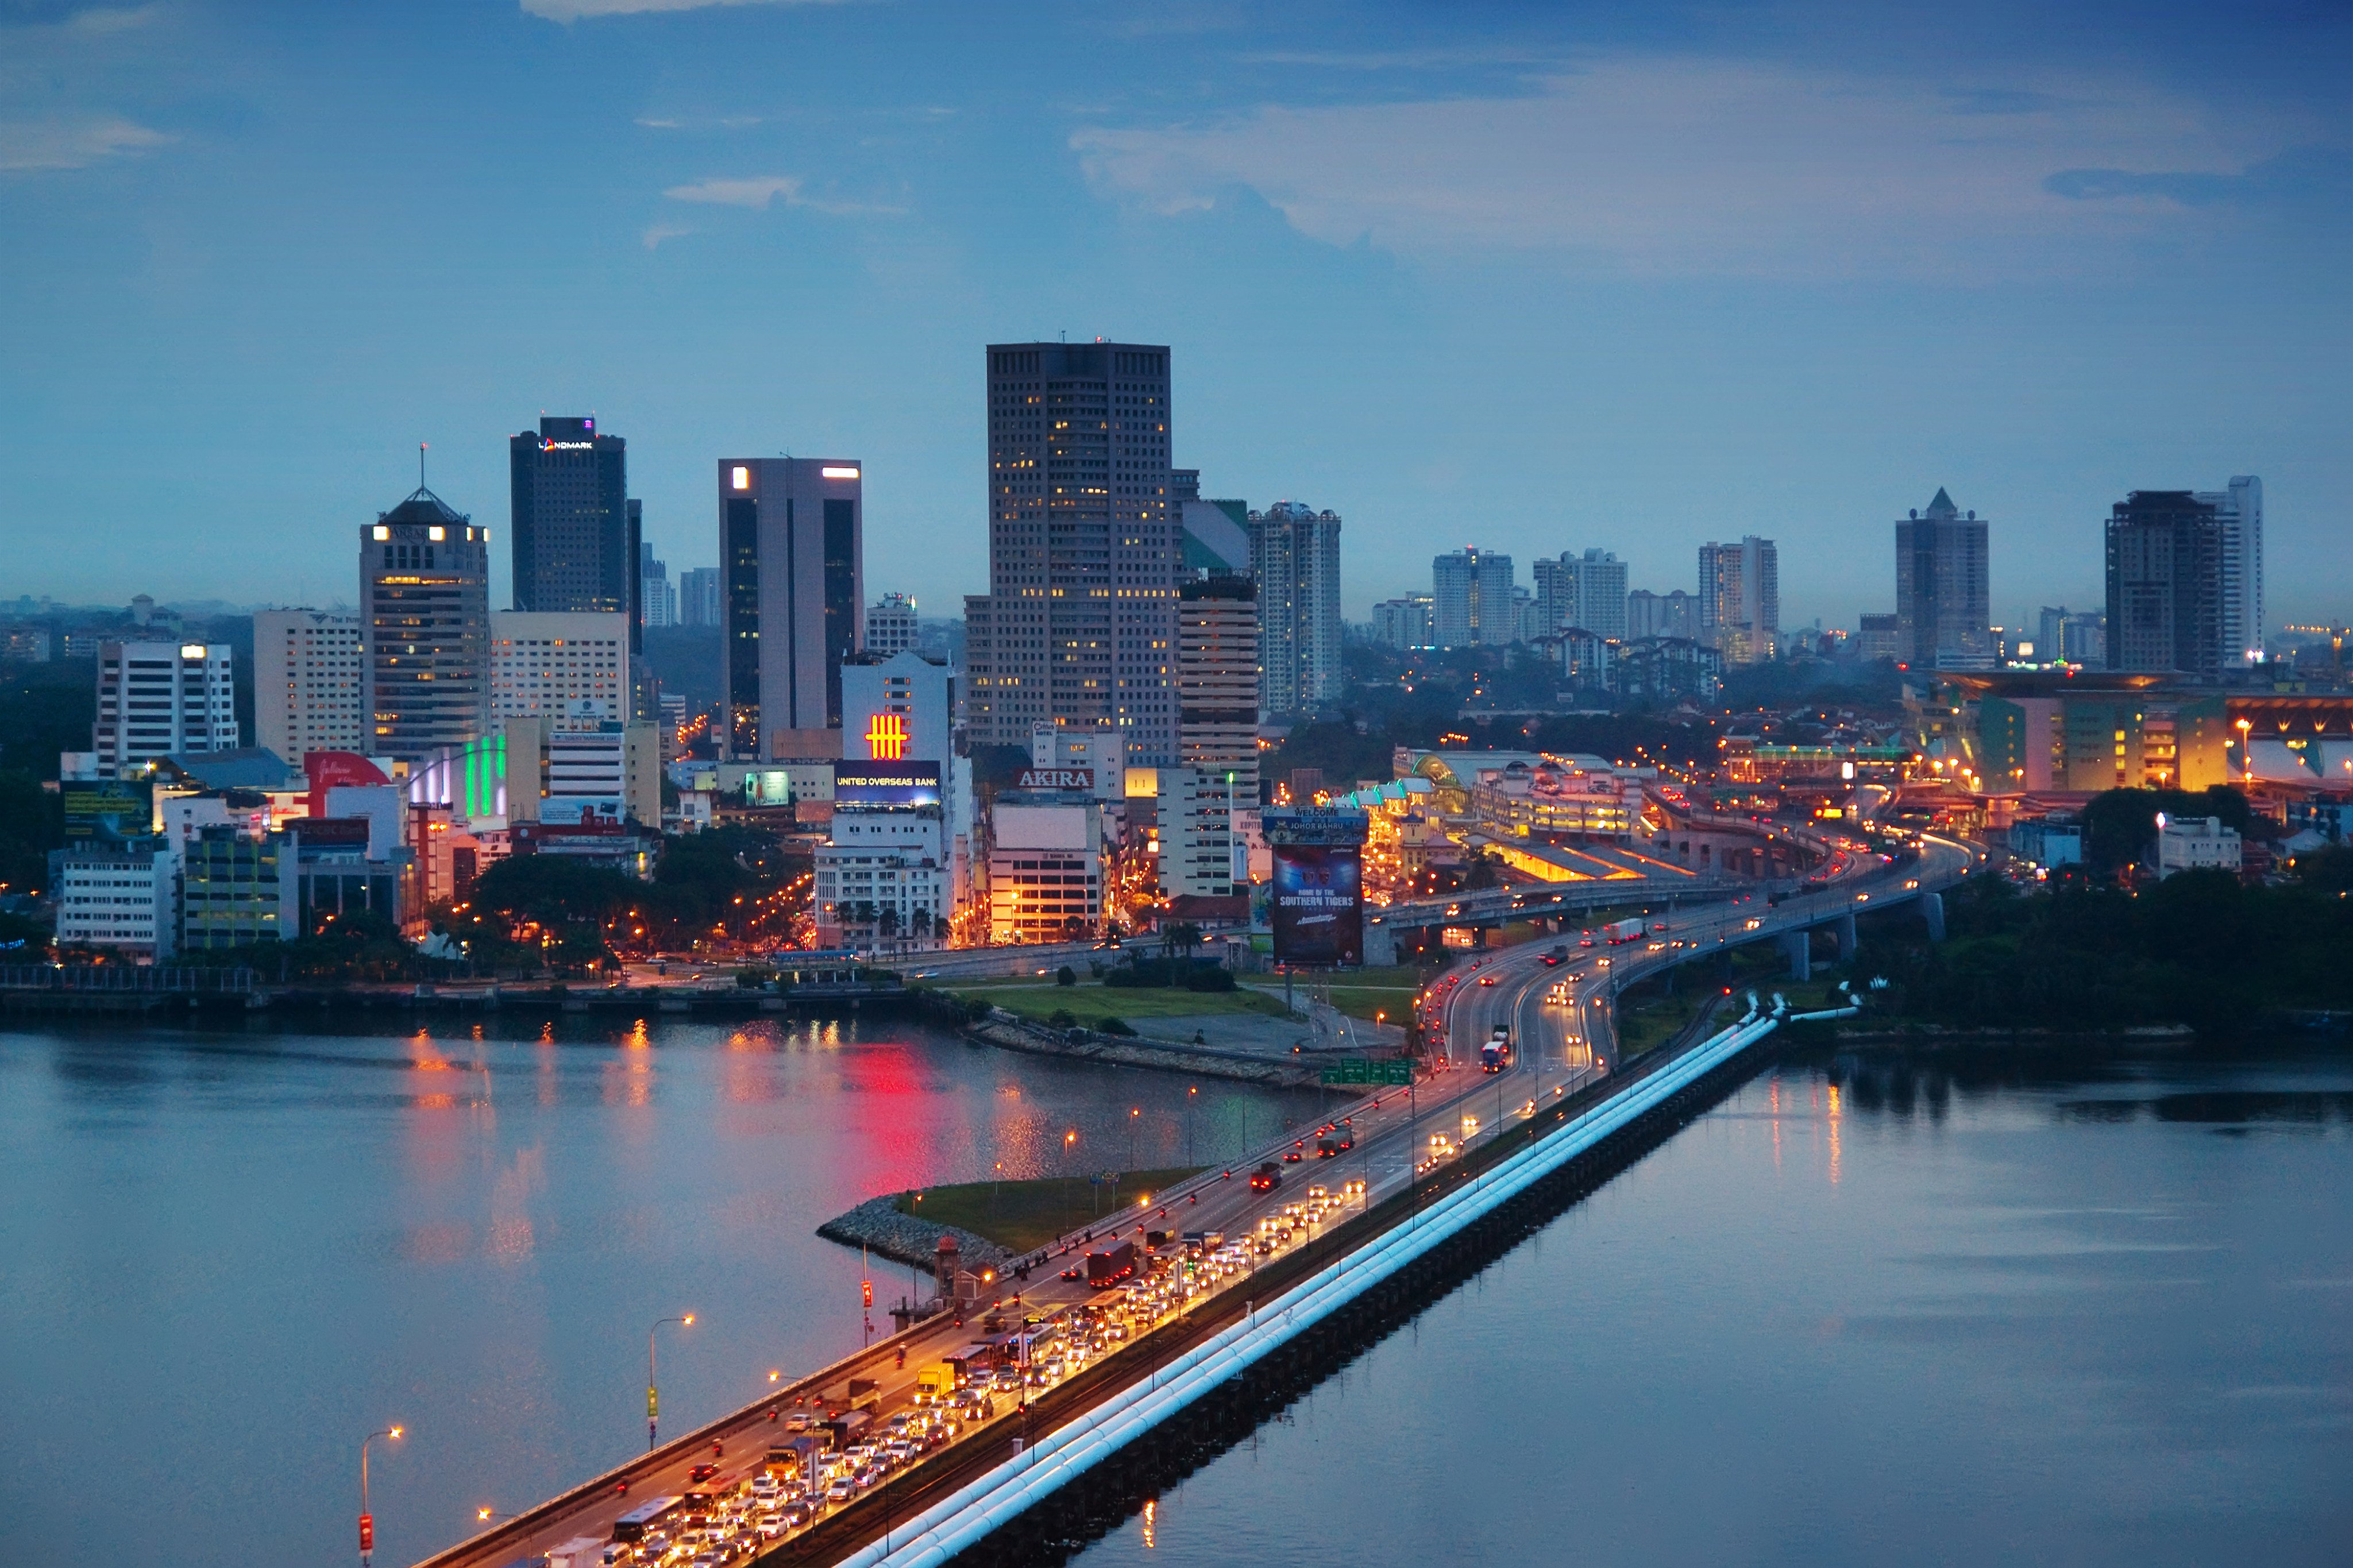 Heavy traffic on the Johor-Singapore Causeway at dusk. Anyone found guilty of entering Malaysia from Singapore without a permit could be fined up to 2,000 ringgit from October 1. Photo: Getty Images/iStockphoto